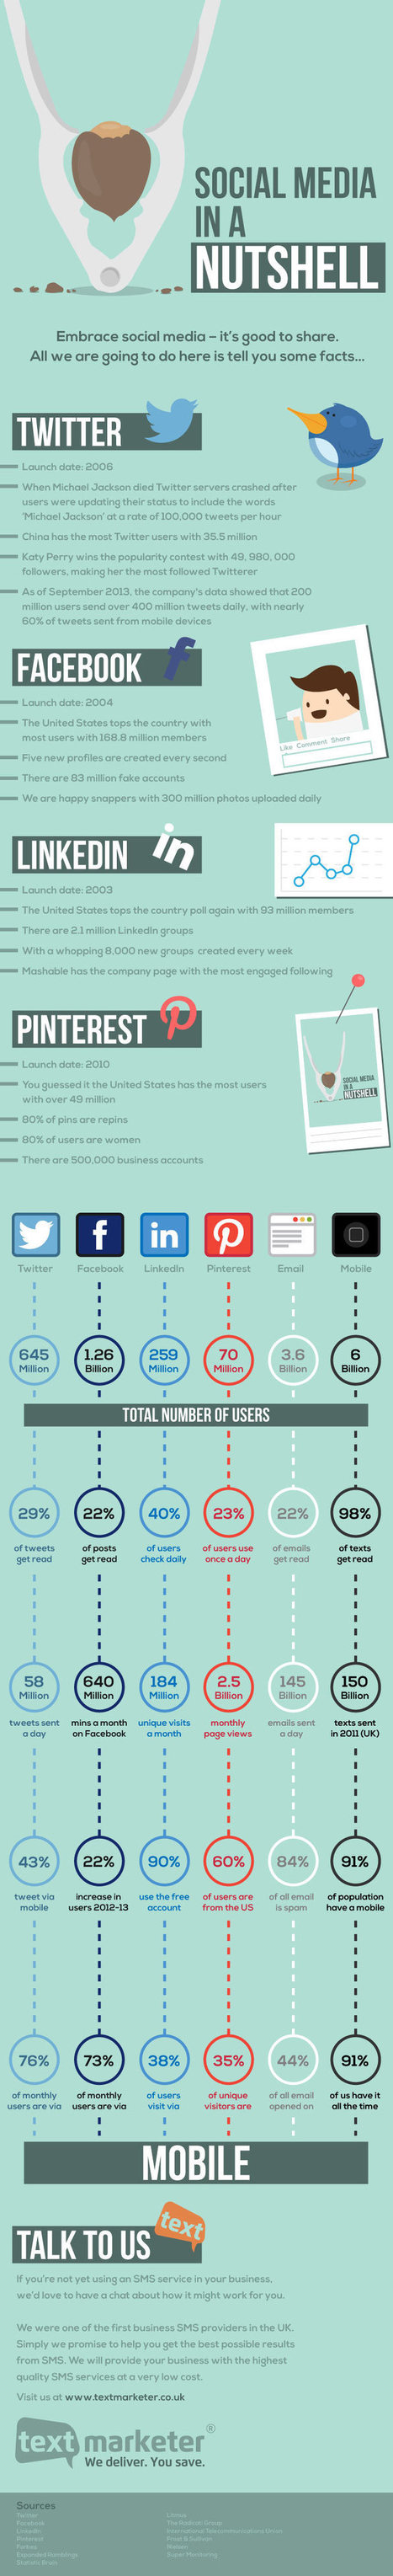 Social Media in a Nutshell an infographic | World's Best Infographics | Scoop.it